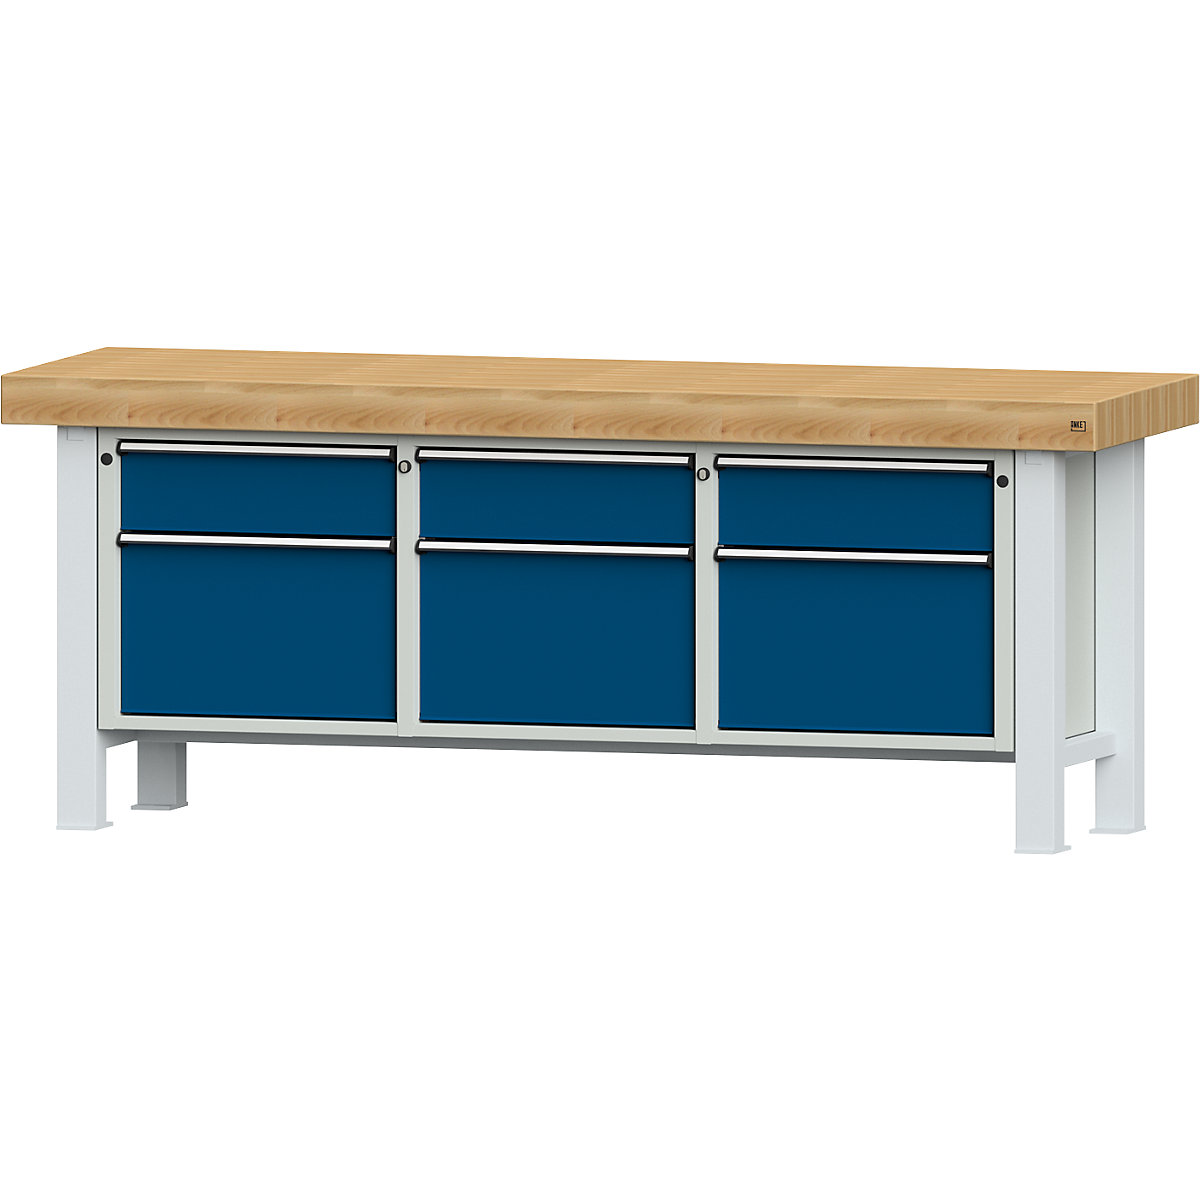 Heavy duty workbench – ANKE, worktop width 2250 mm, with 3 drawers and 3 hinged doors, worktop thickness 100 mm-8